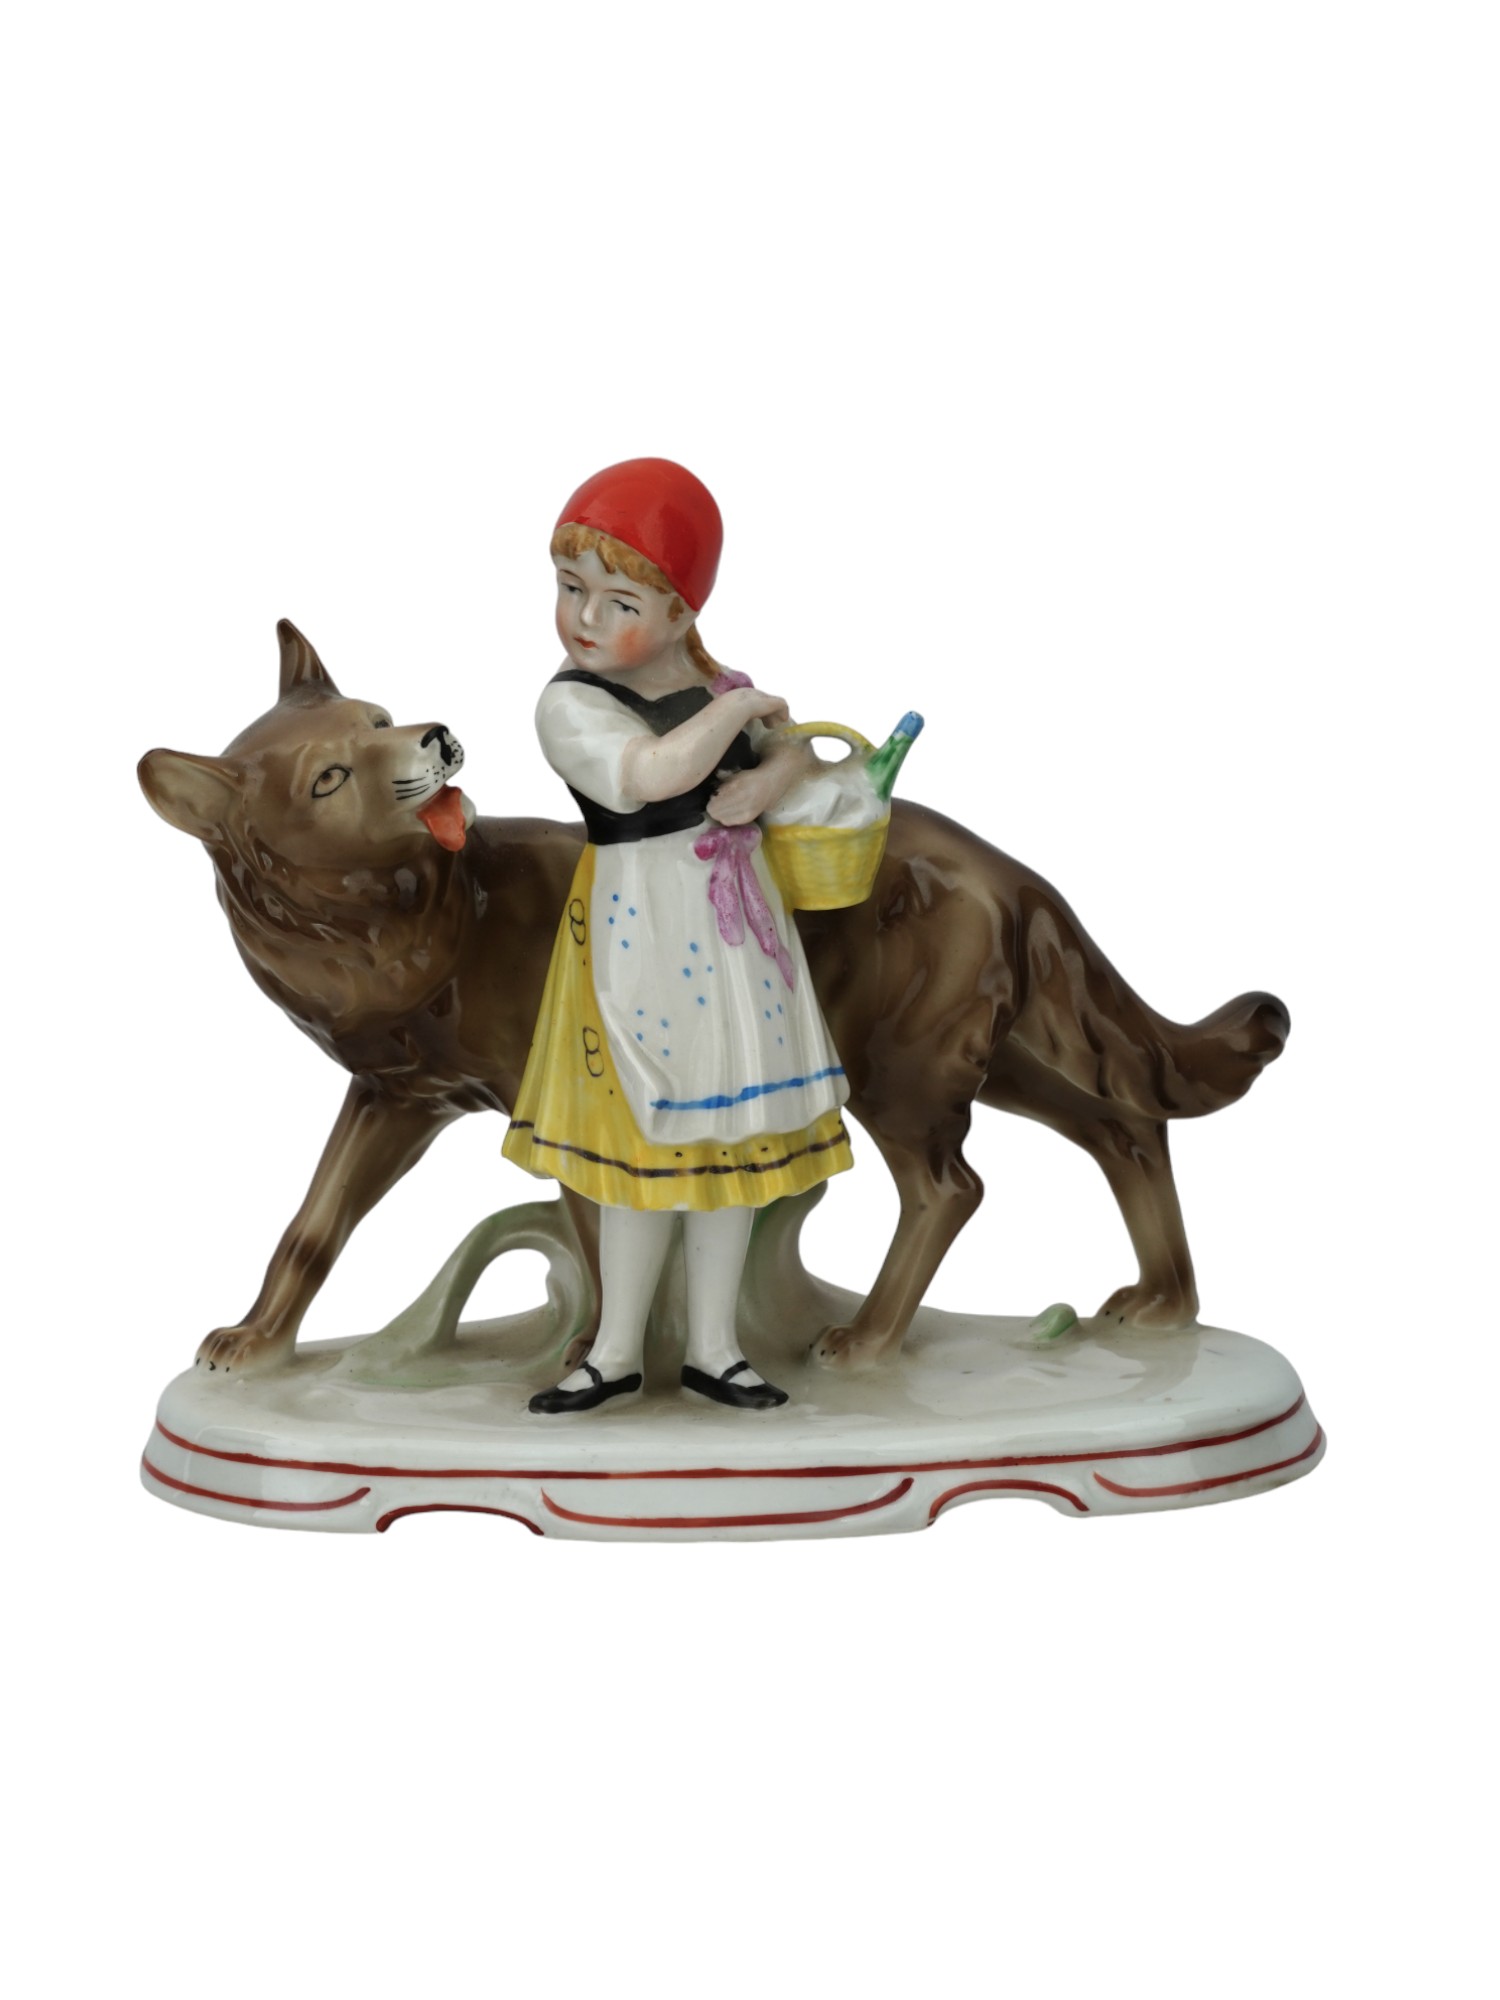 GERMAN WEISS KUHNERT RED RIDING HOOD PORCELAIN FIGURINE PIC-1